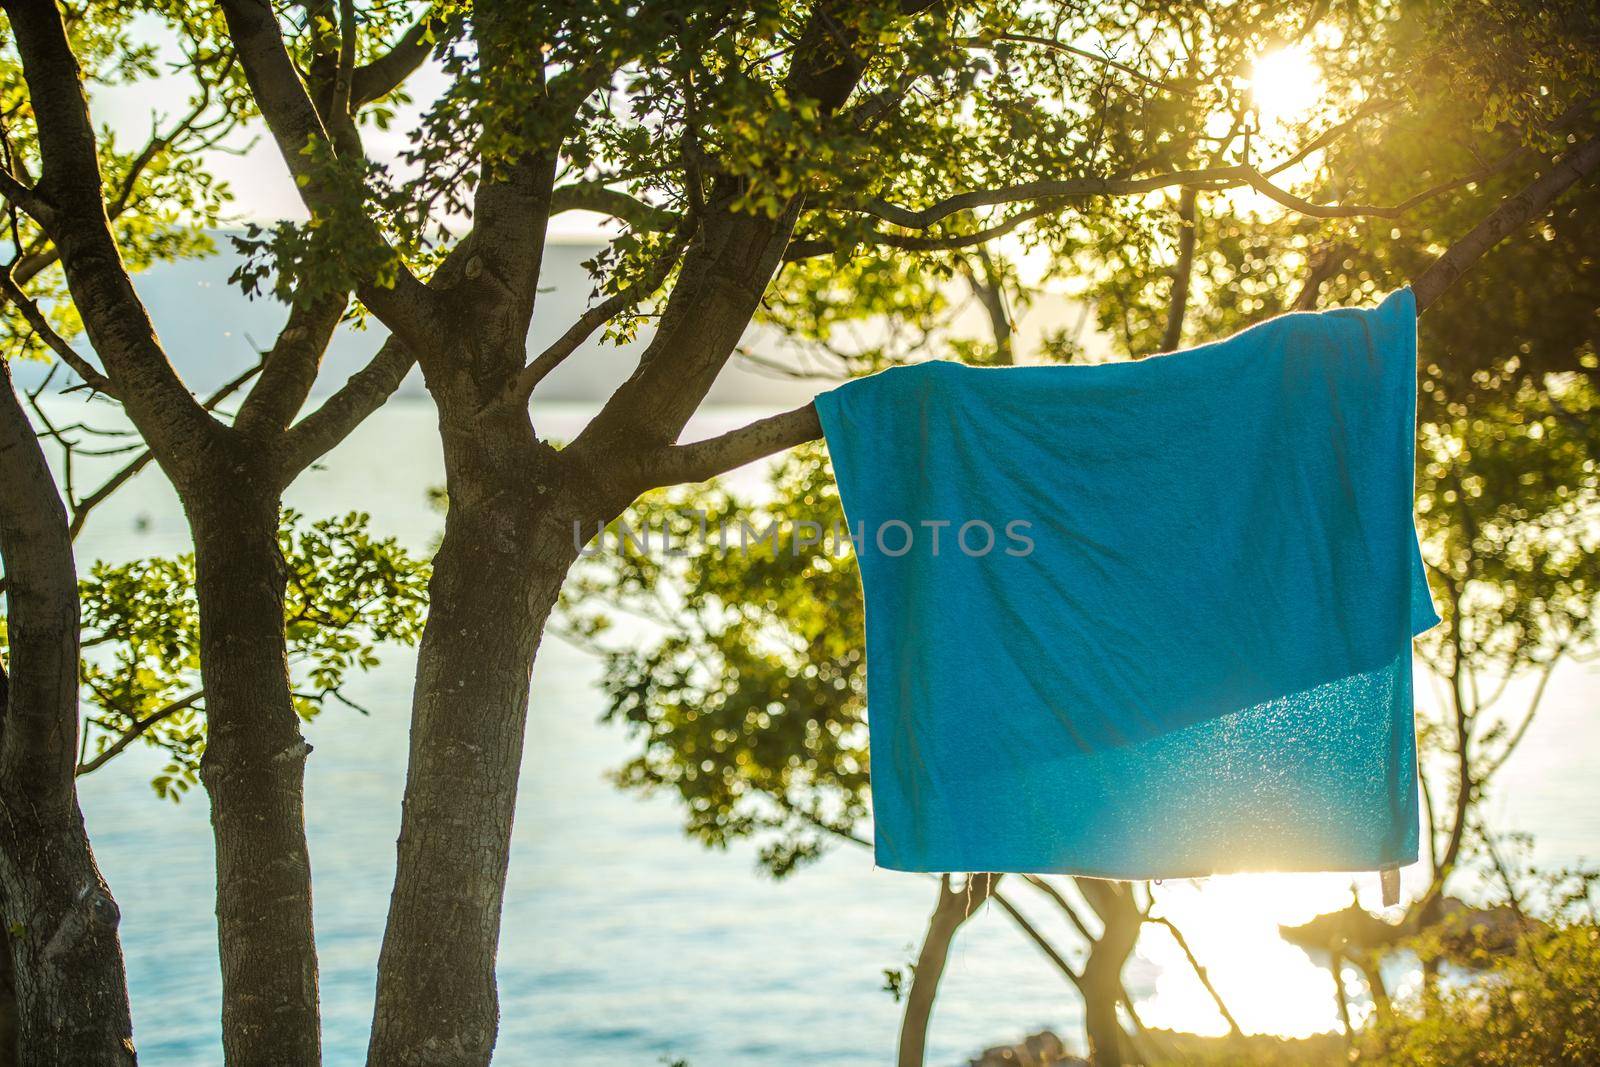 Wet Towel on a Tree Branch. Summer Vacation at the Sea Concept.